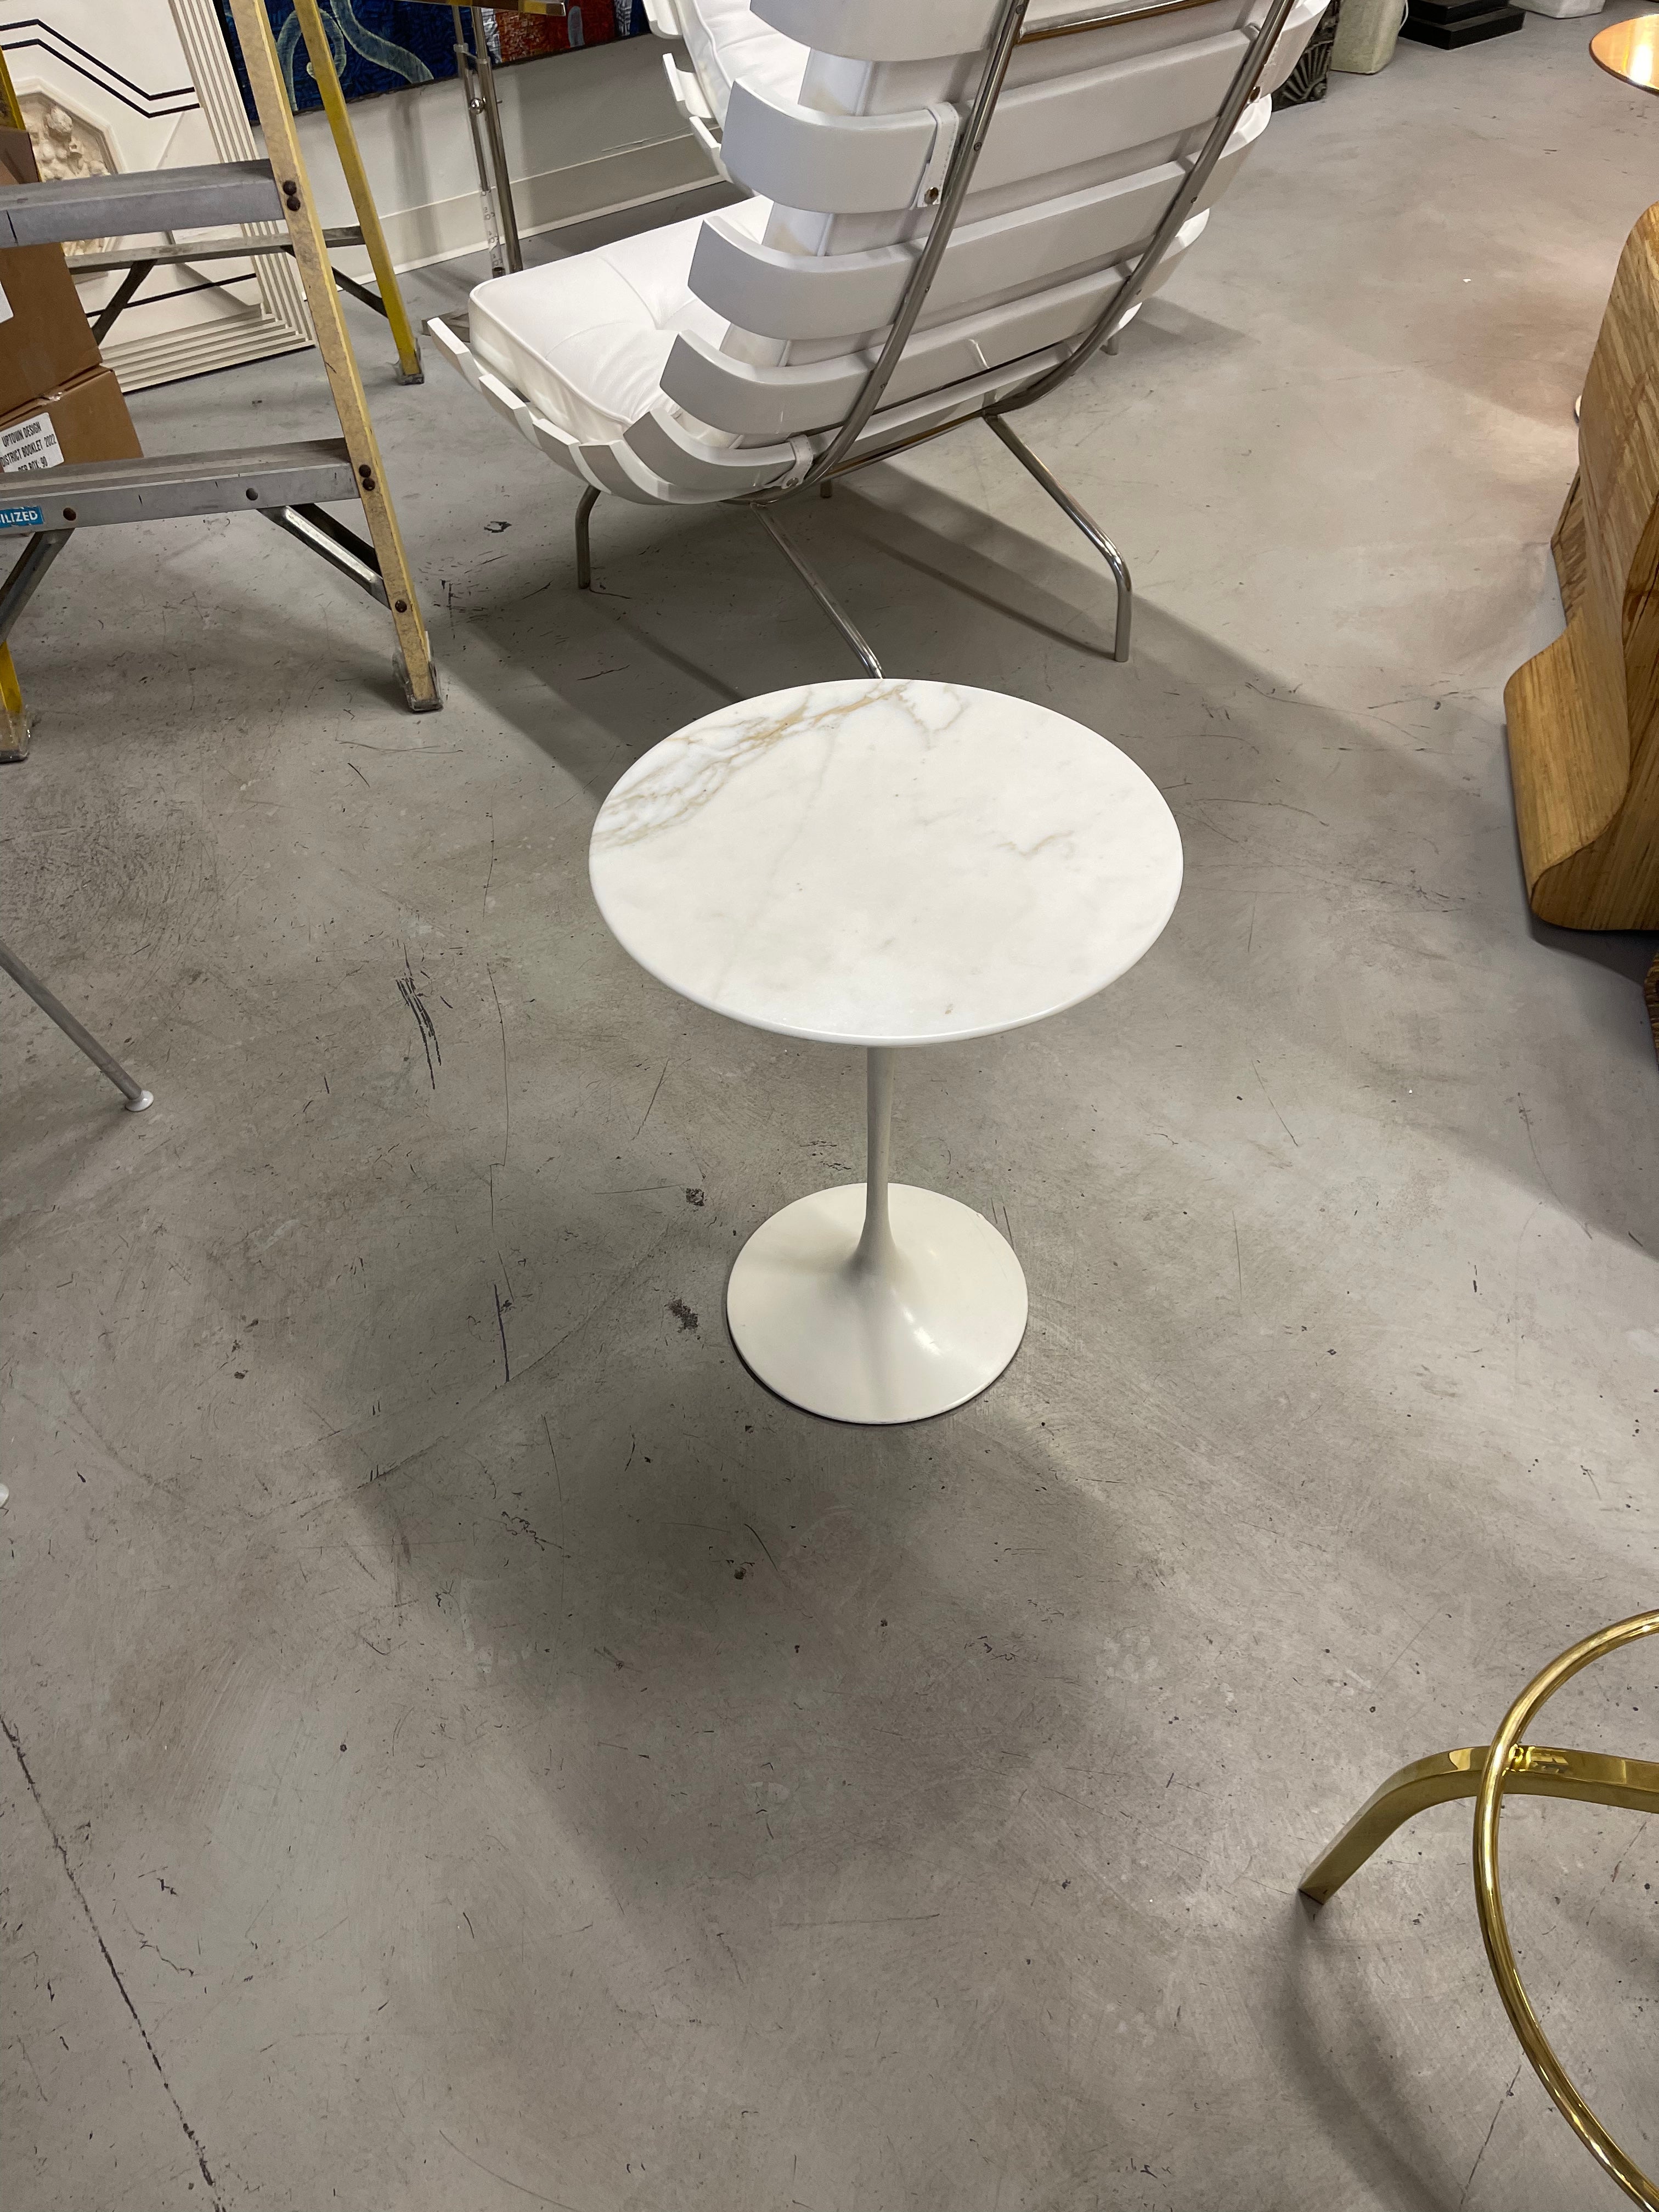 Wonderful early production Knoll Eero Saarinen tulip table. Lovely colored marble top. Out of the same estate as another early walnut table we have for sale. Age appropriate wear. Top is in good condition, the base has a nick and a scratch both are